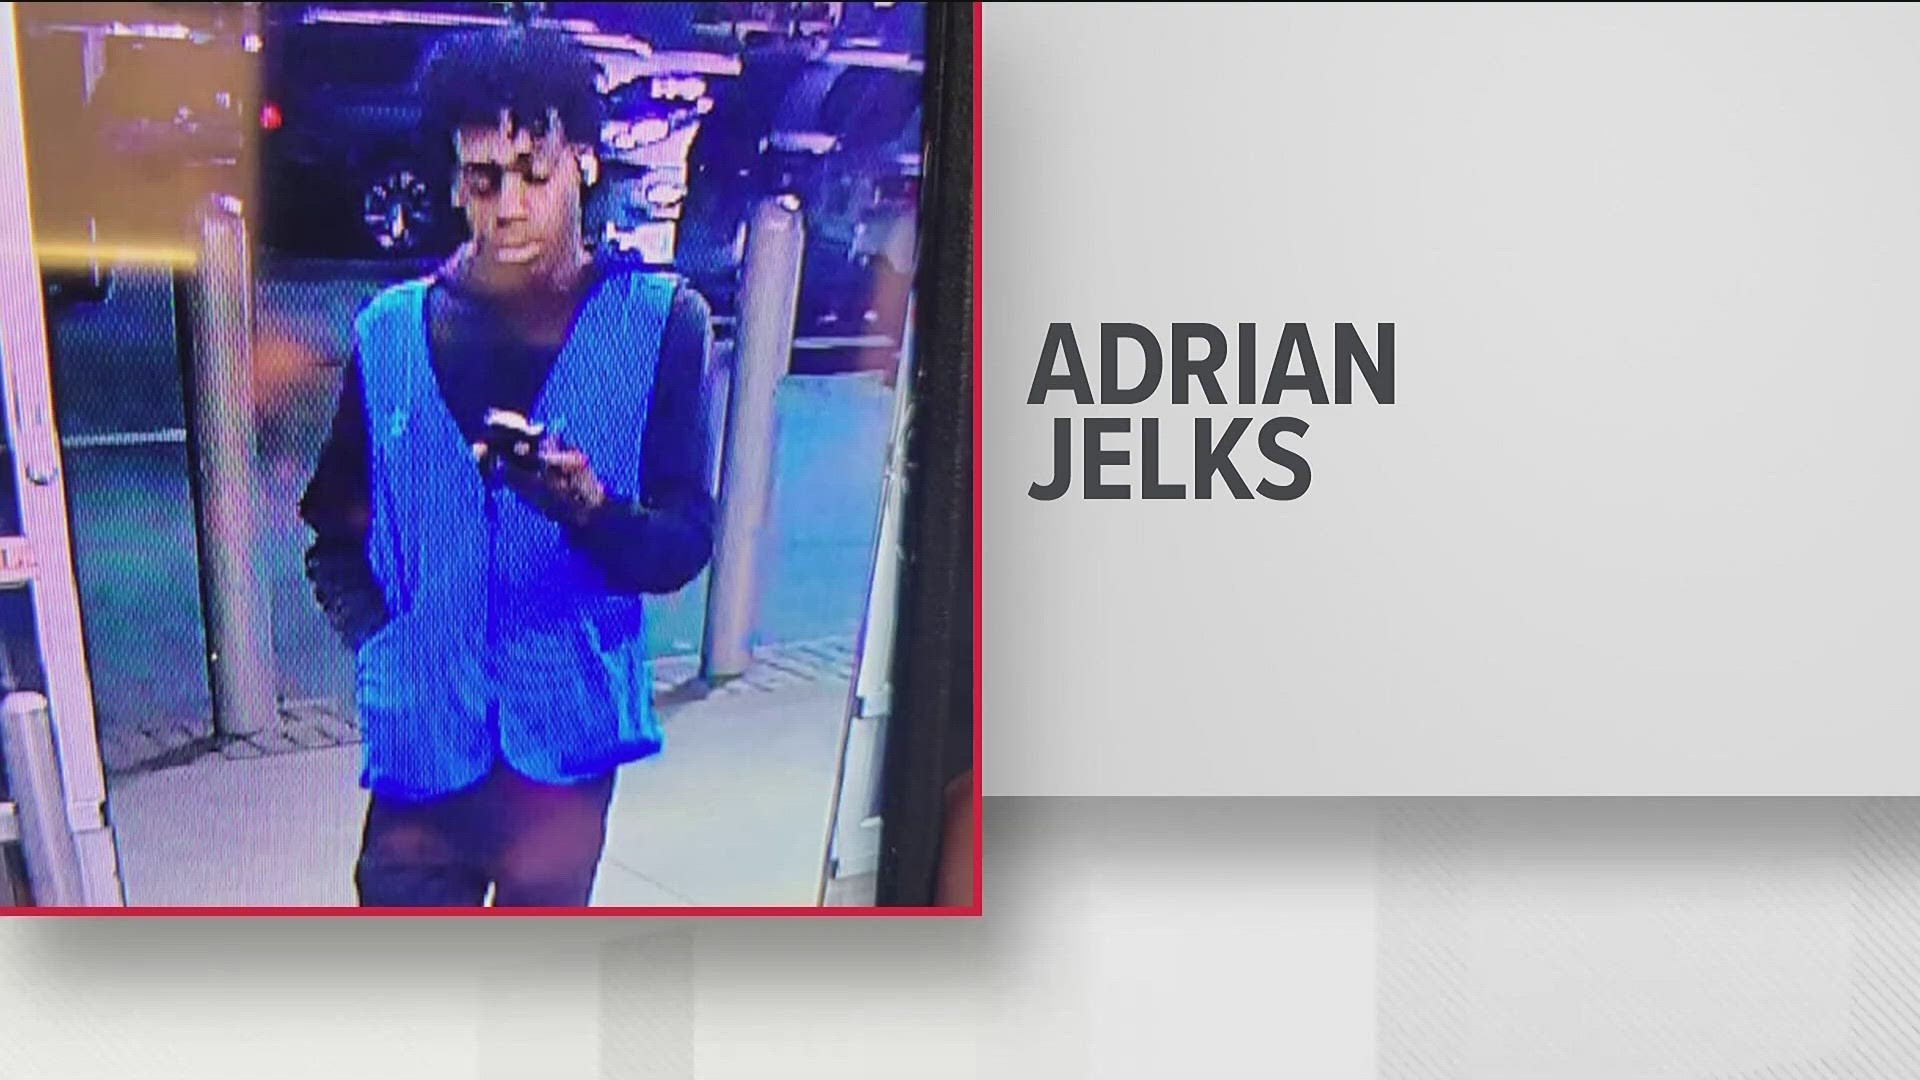 Police are searching for the suspect, 19-year-old Adrian Jelks.